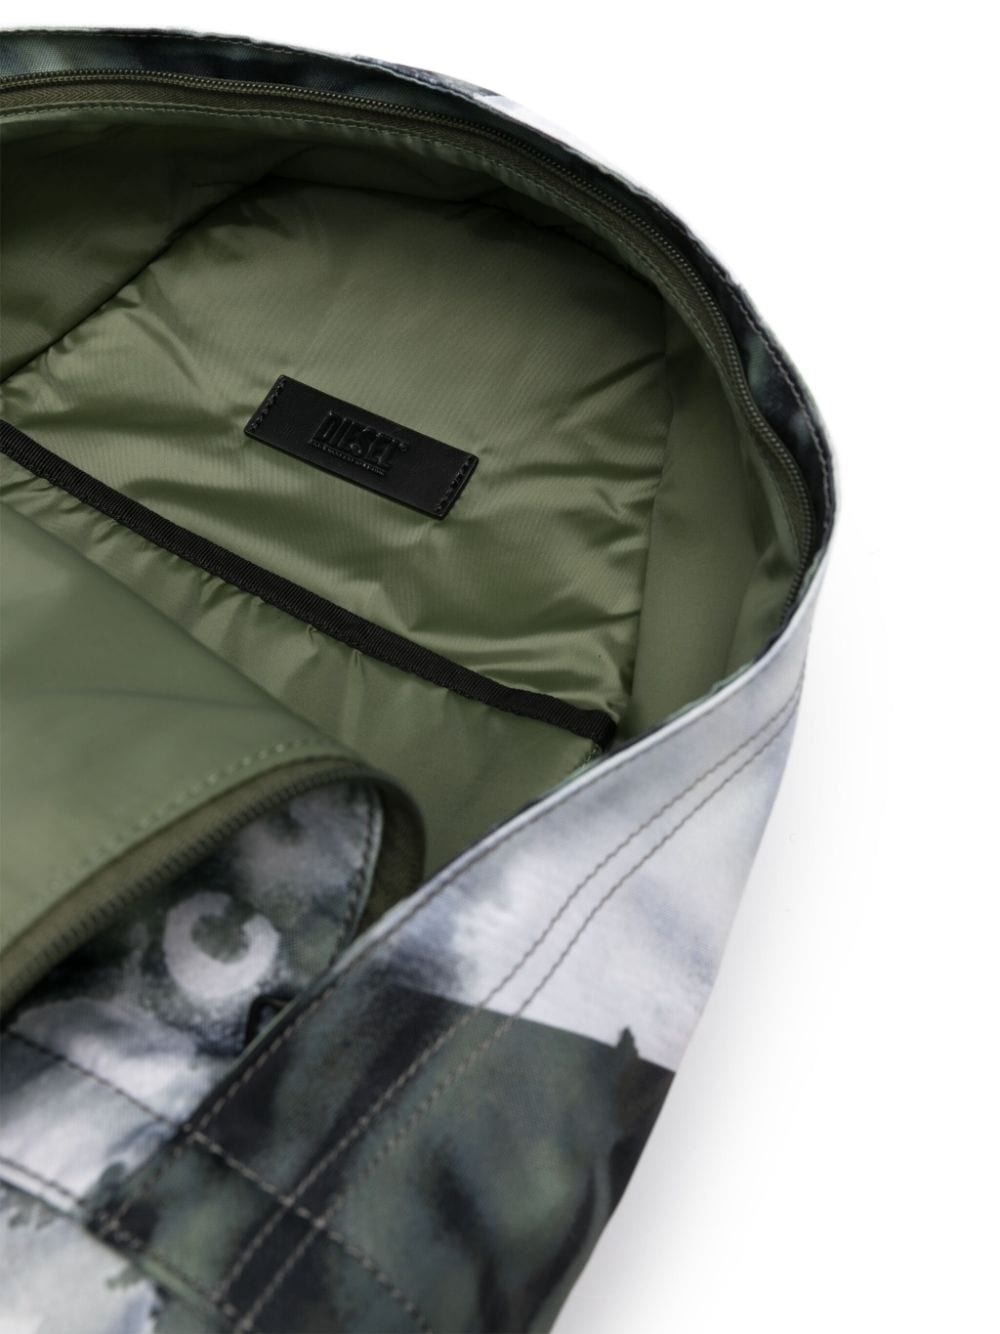 Rave X camouflage-print backpack - 5